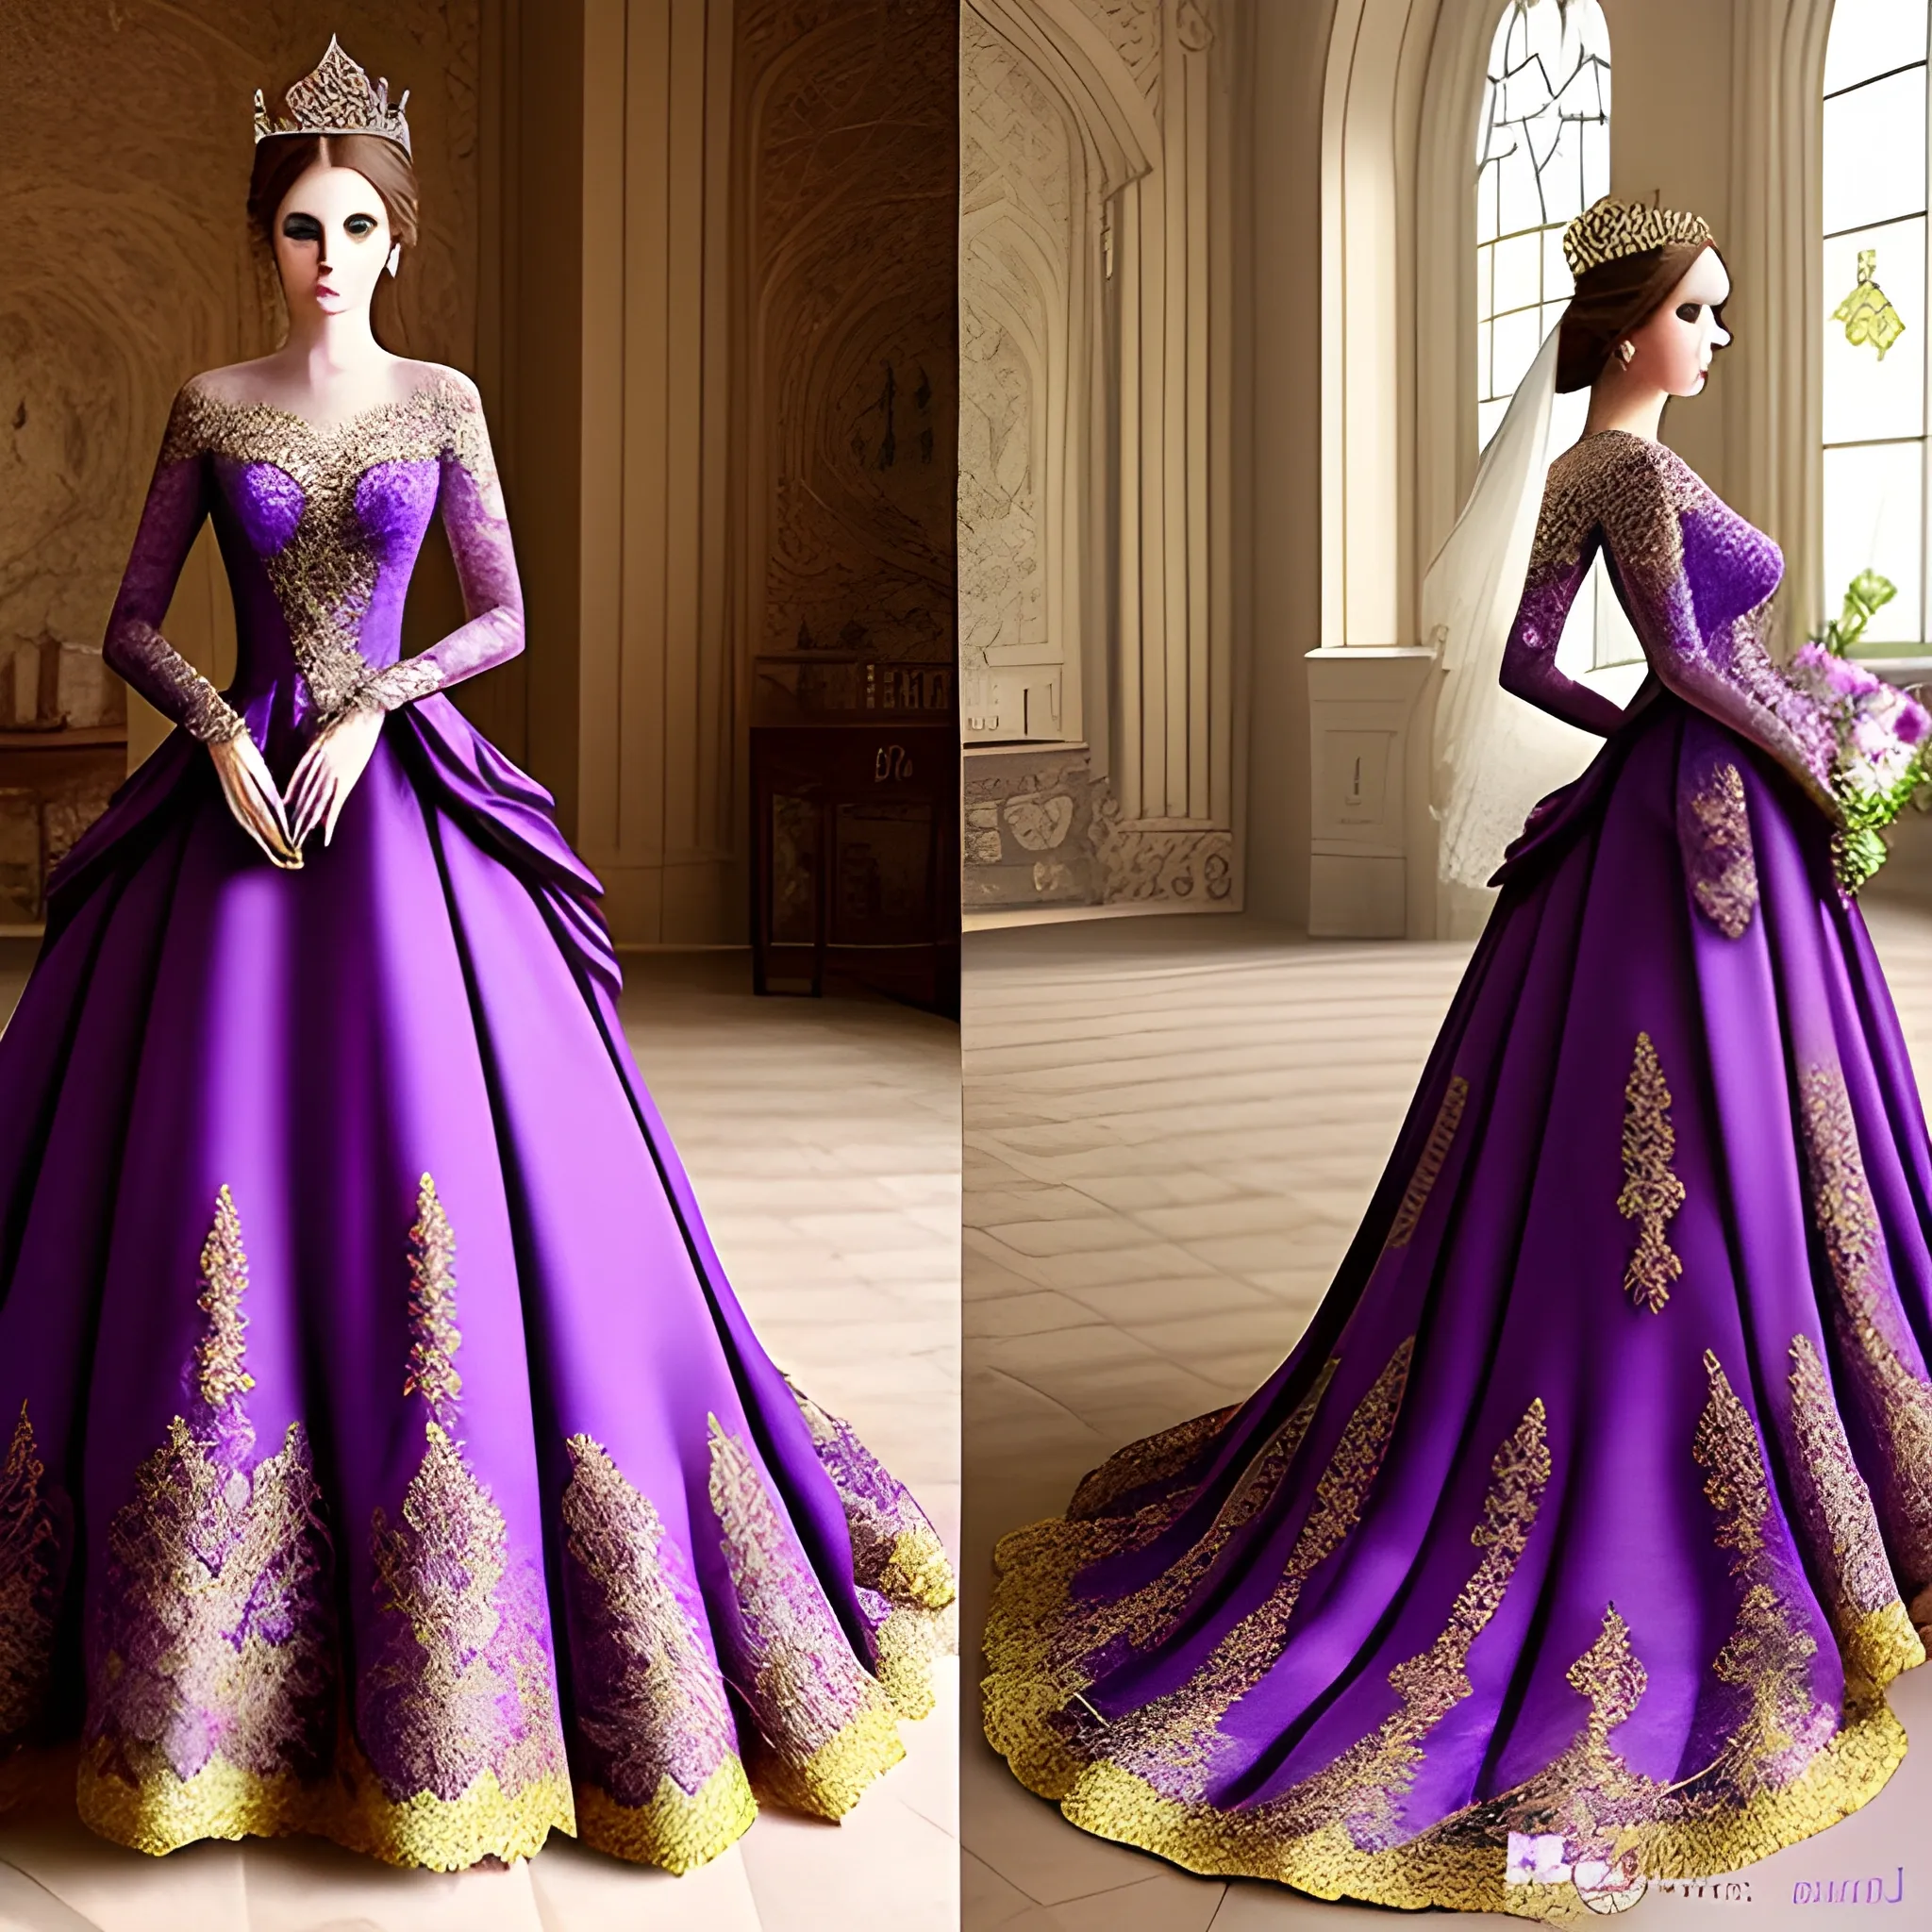 Intricate fantasy wedding gown purple and gold lace goddess train empress sleeves crown style extravagant